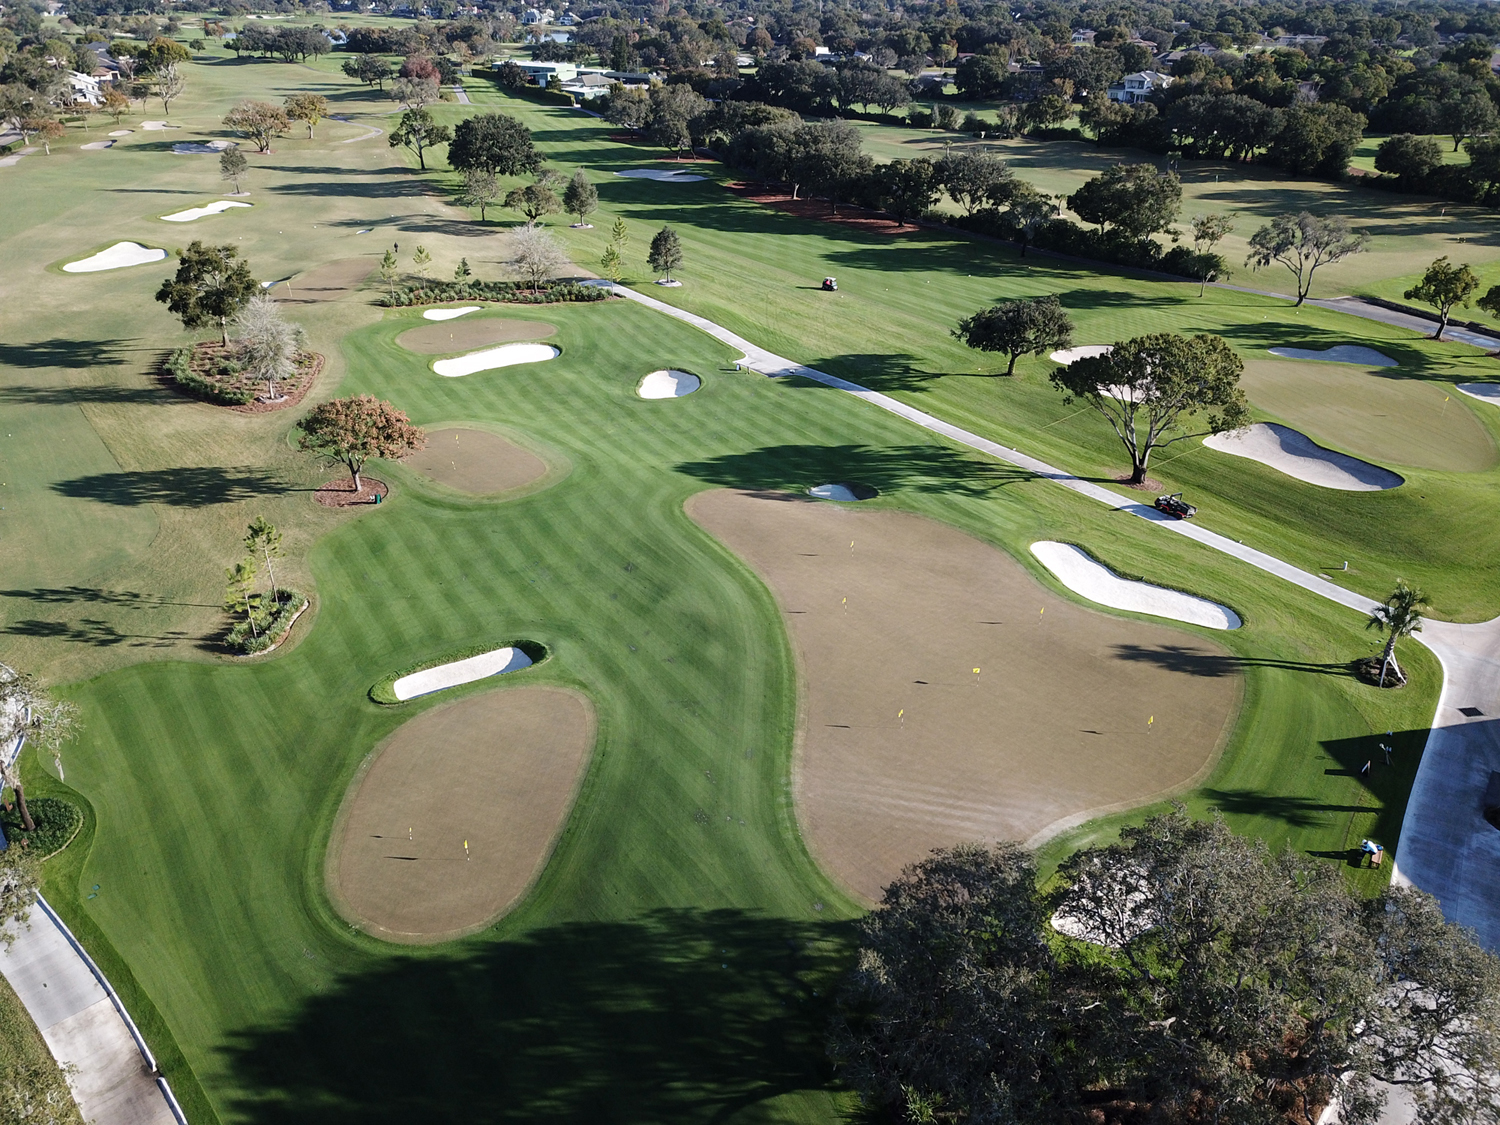 An Upgraded Short Game Area Taking Bay Hill Club & Lodge into the